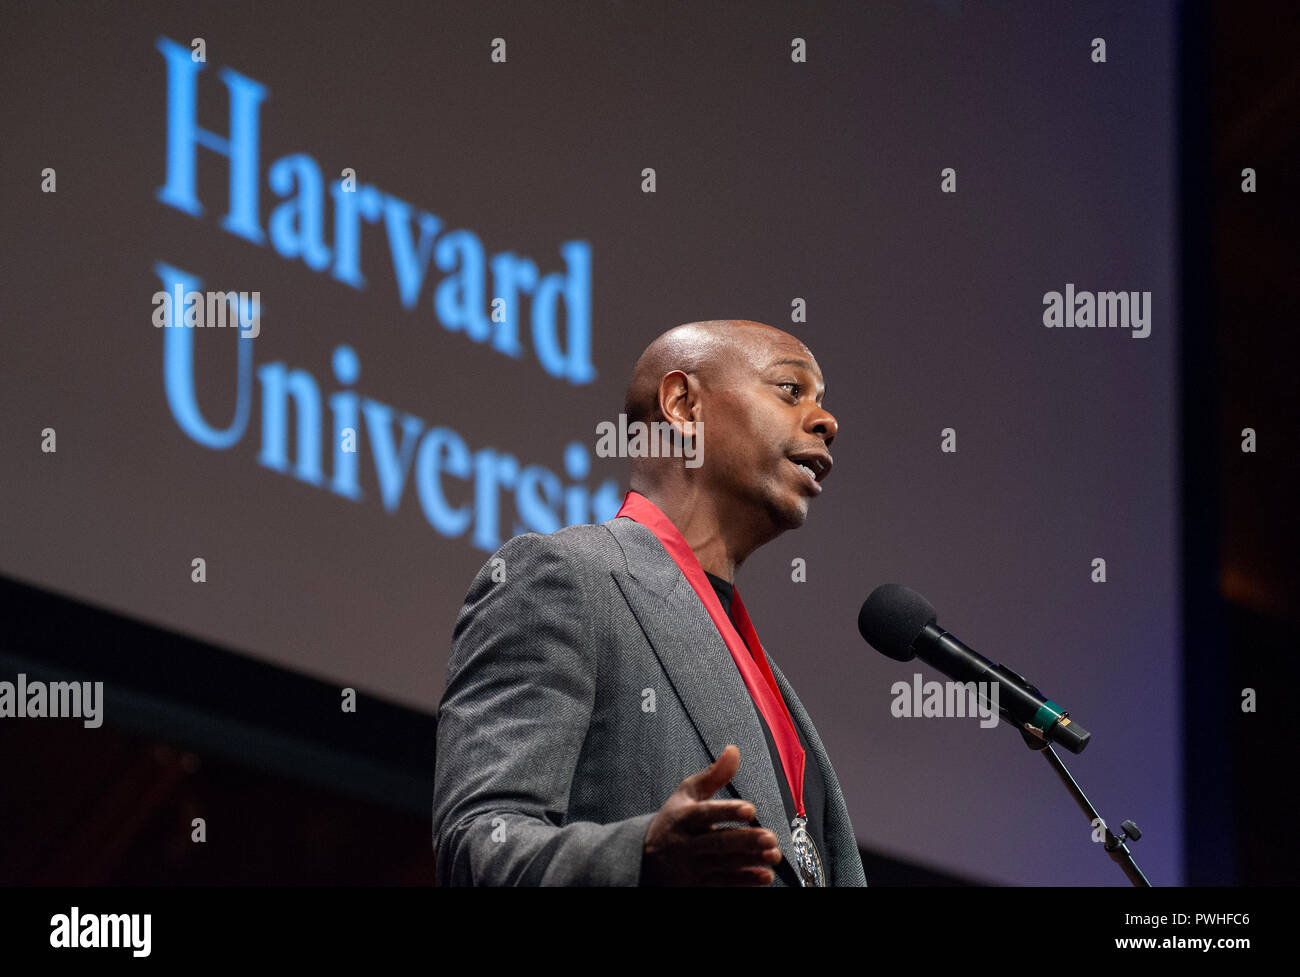 10/11/2018: Hutchins Center, Harvard University, Cambridge, MA. Actor and Comedian Dave Chappelle speaking after receiving a W.E.B. Du Bois medal.  Chappelle was one of eight African Americans to receive the medal for their contribution to African and African American history and culture at Harvard University in Cambridge, Massachusetts, USA. The W.E.B. Du Bois medals have been awarded yearly since 2013 to those who have made significant contributions to African and African American history and culture. Stock Photo